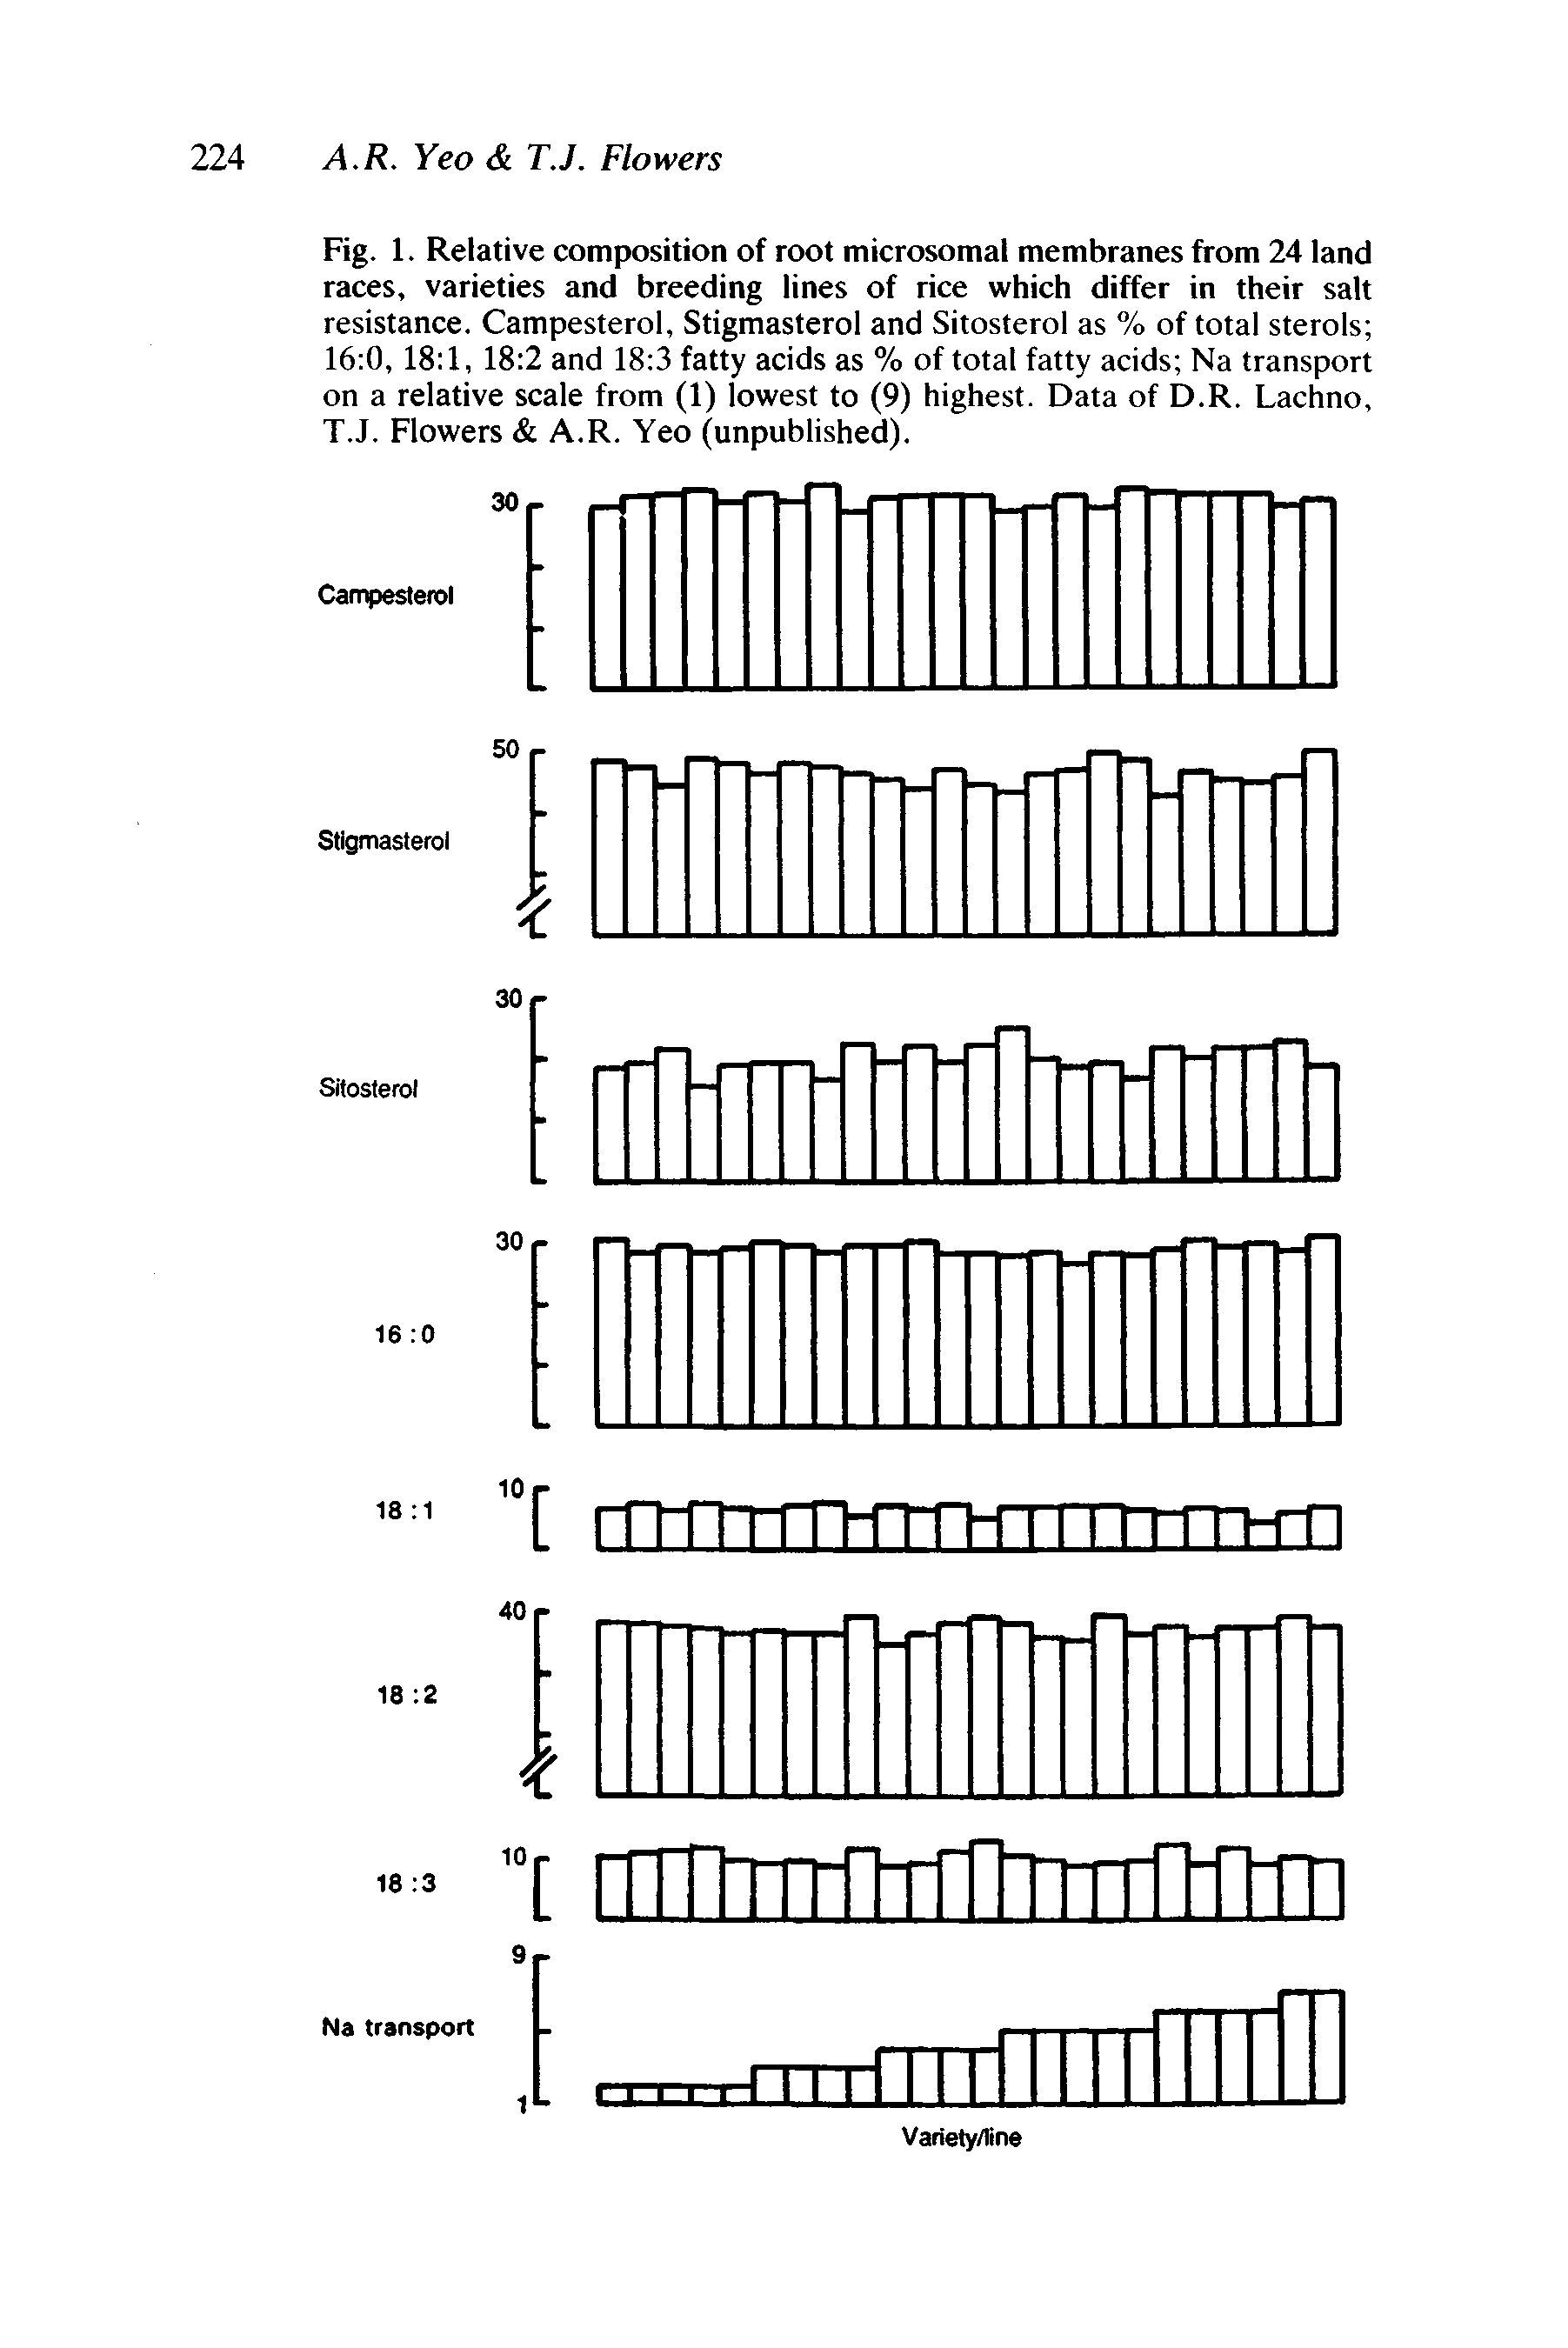 Fig. 1. Relative composition of root microsomal membranes from 24 land races, varieties and breeding lines of rice which differ in their salt resistance. Campesterol, Stigmasterol and Sitosterol as % of total sterols 16 0, 18 1, 18 2 and 18 3 fatty acids as % of total fatty acids Na transport on a relative scale from (1) lowest to (9) highest. Data of D.R. Lachno, T.J. Flowers A.R. Yeo (unpublished).